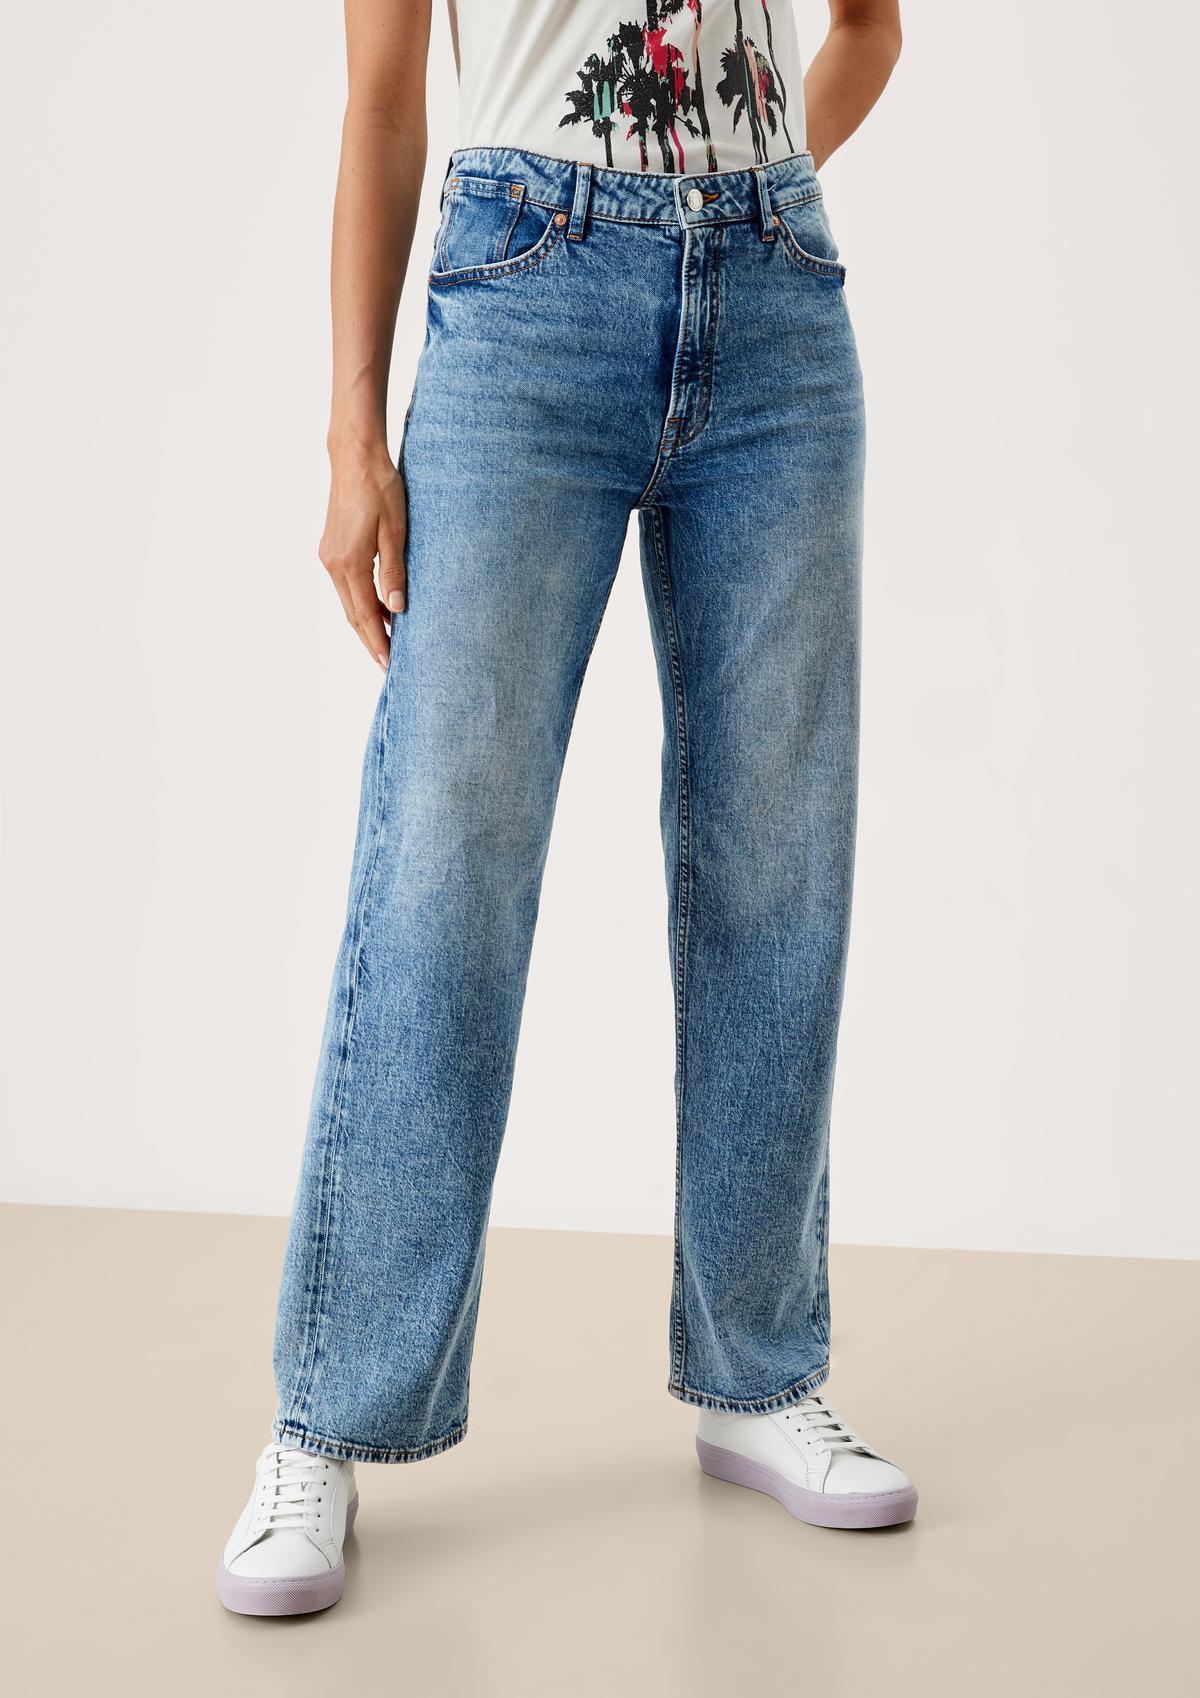 Ankle-Jeans Franciz / Relaxed Fit / Mid Rise / Tapered Leg